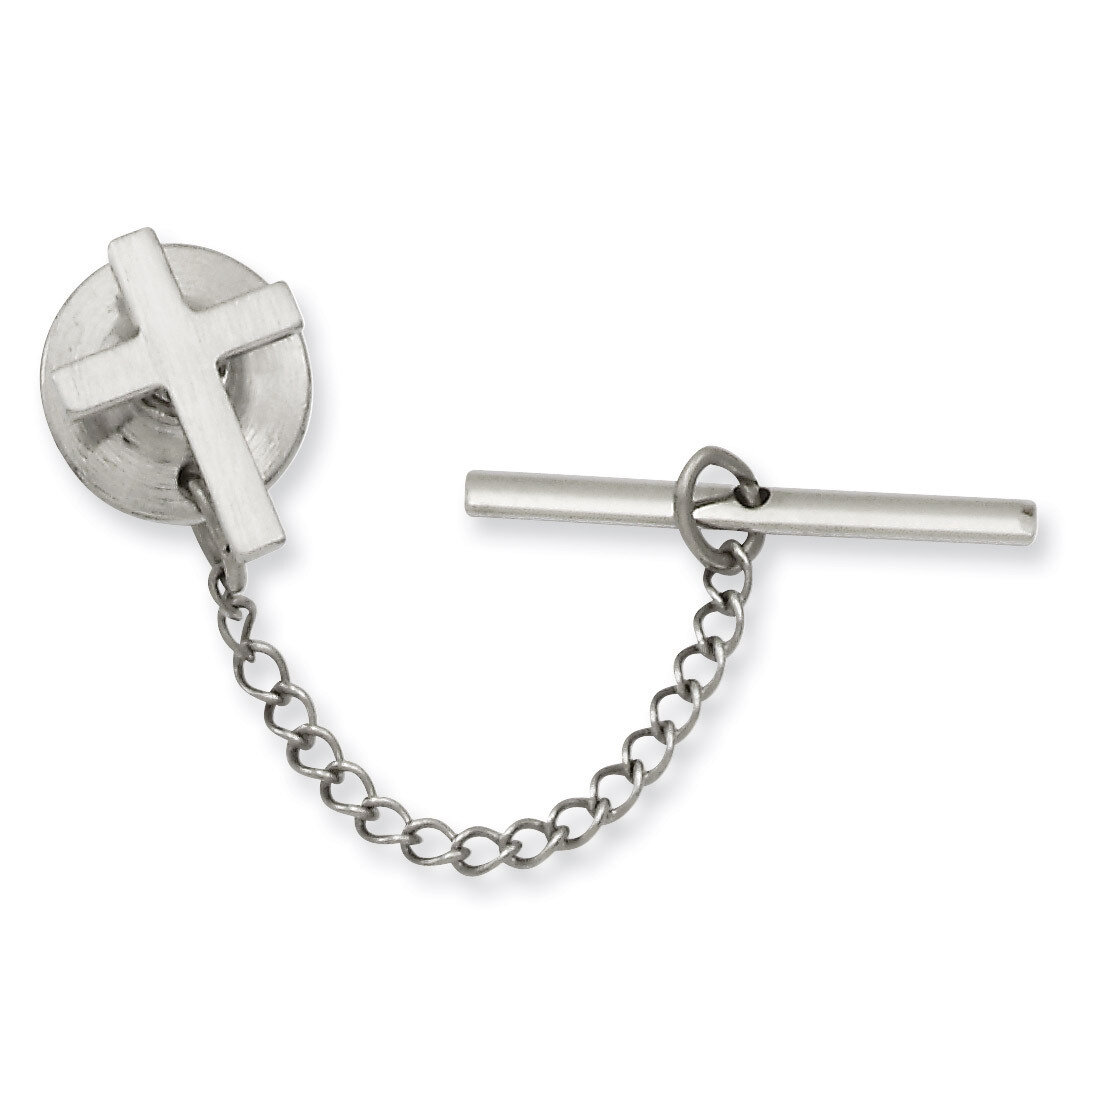 Kelly Waters Small Plain Cross Tie Tack Rhodium-plated KW566